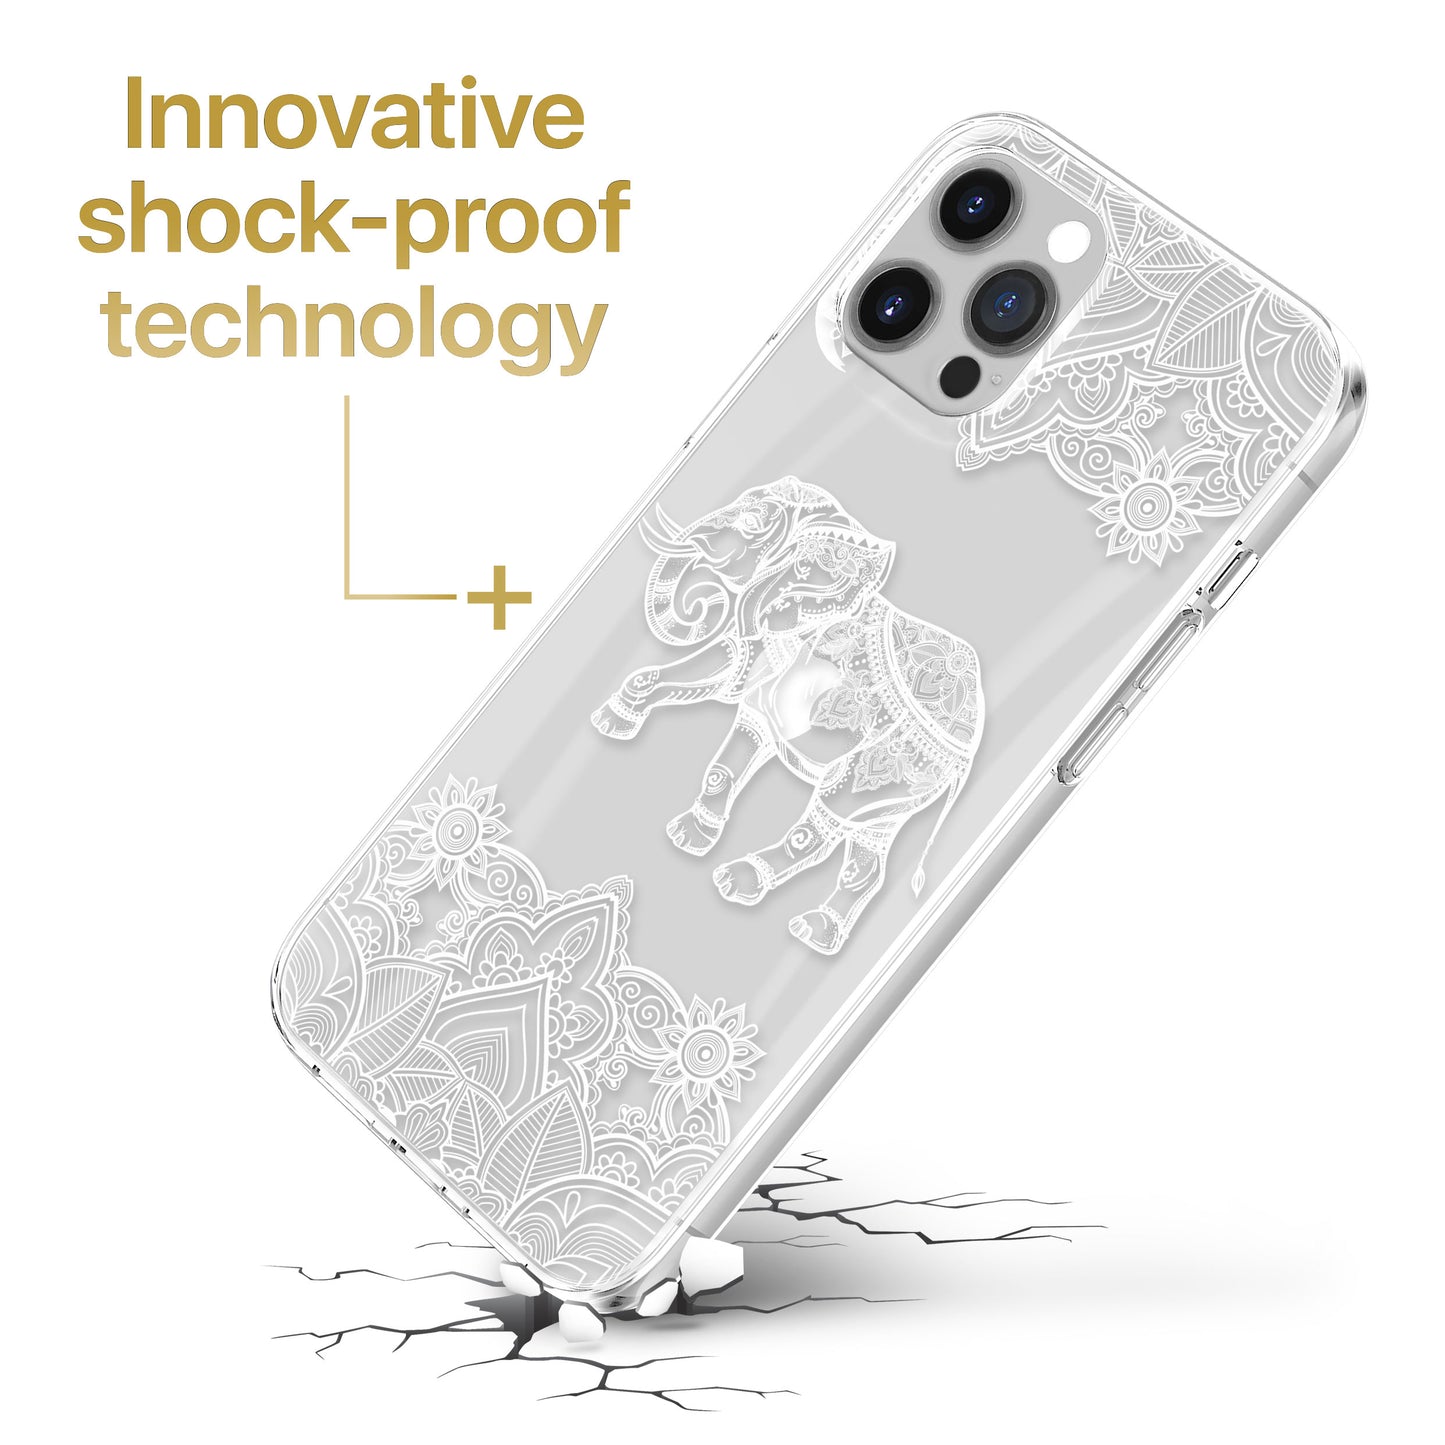 TPU Clear case with (Royal Elephant Mandala) Design for iPhone & Samsung Phones